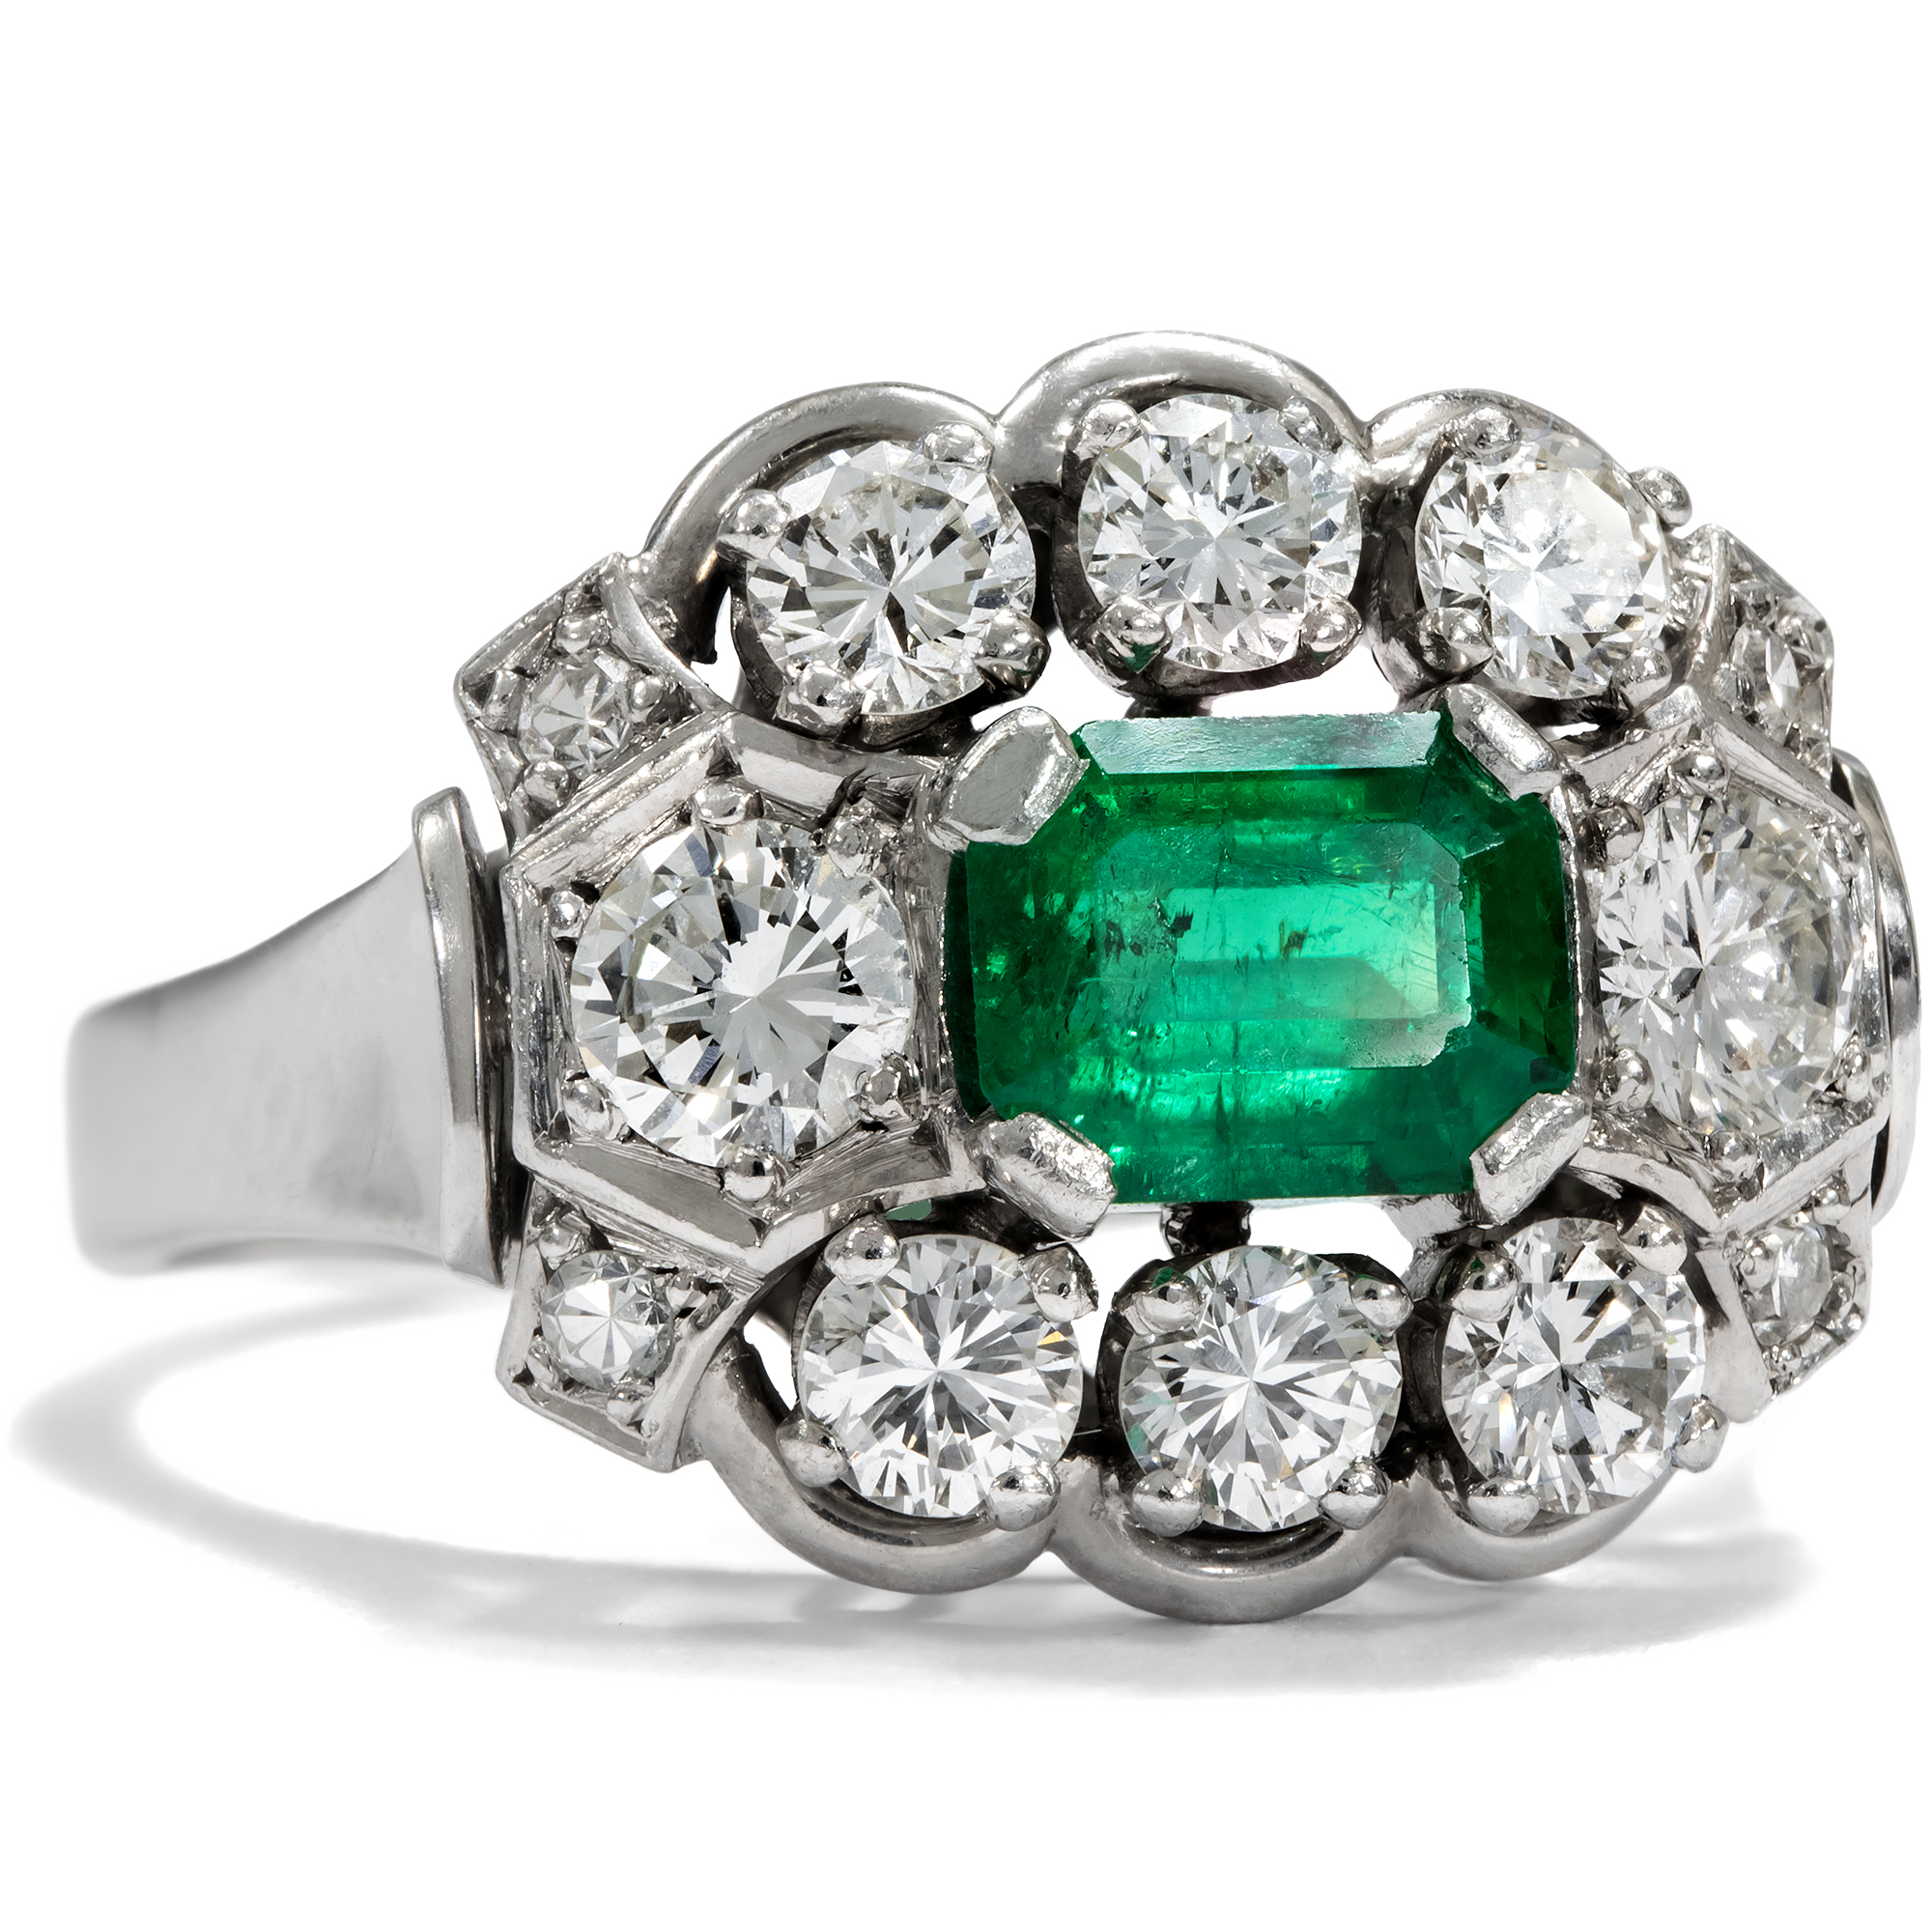 Precious Vintage Ring with Colombian Emerald & Diamonds, c. 1955